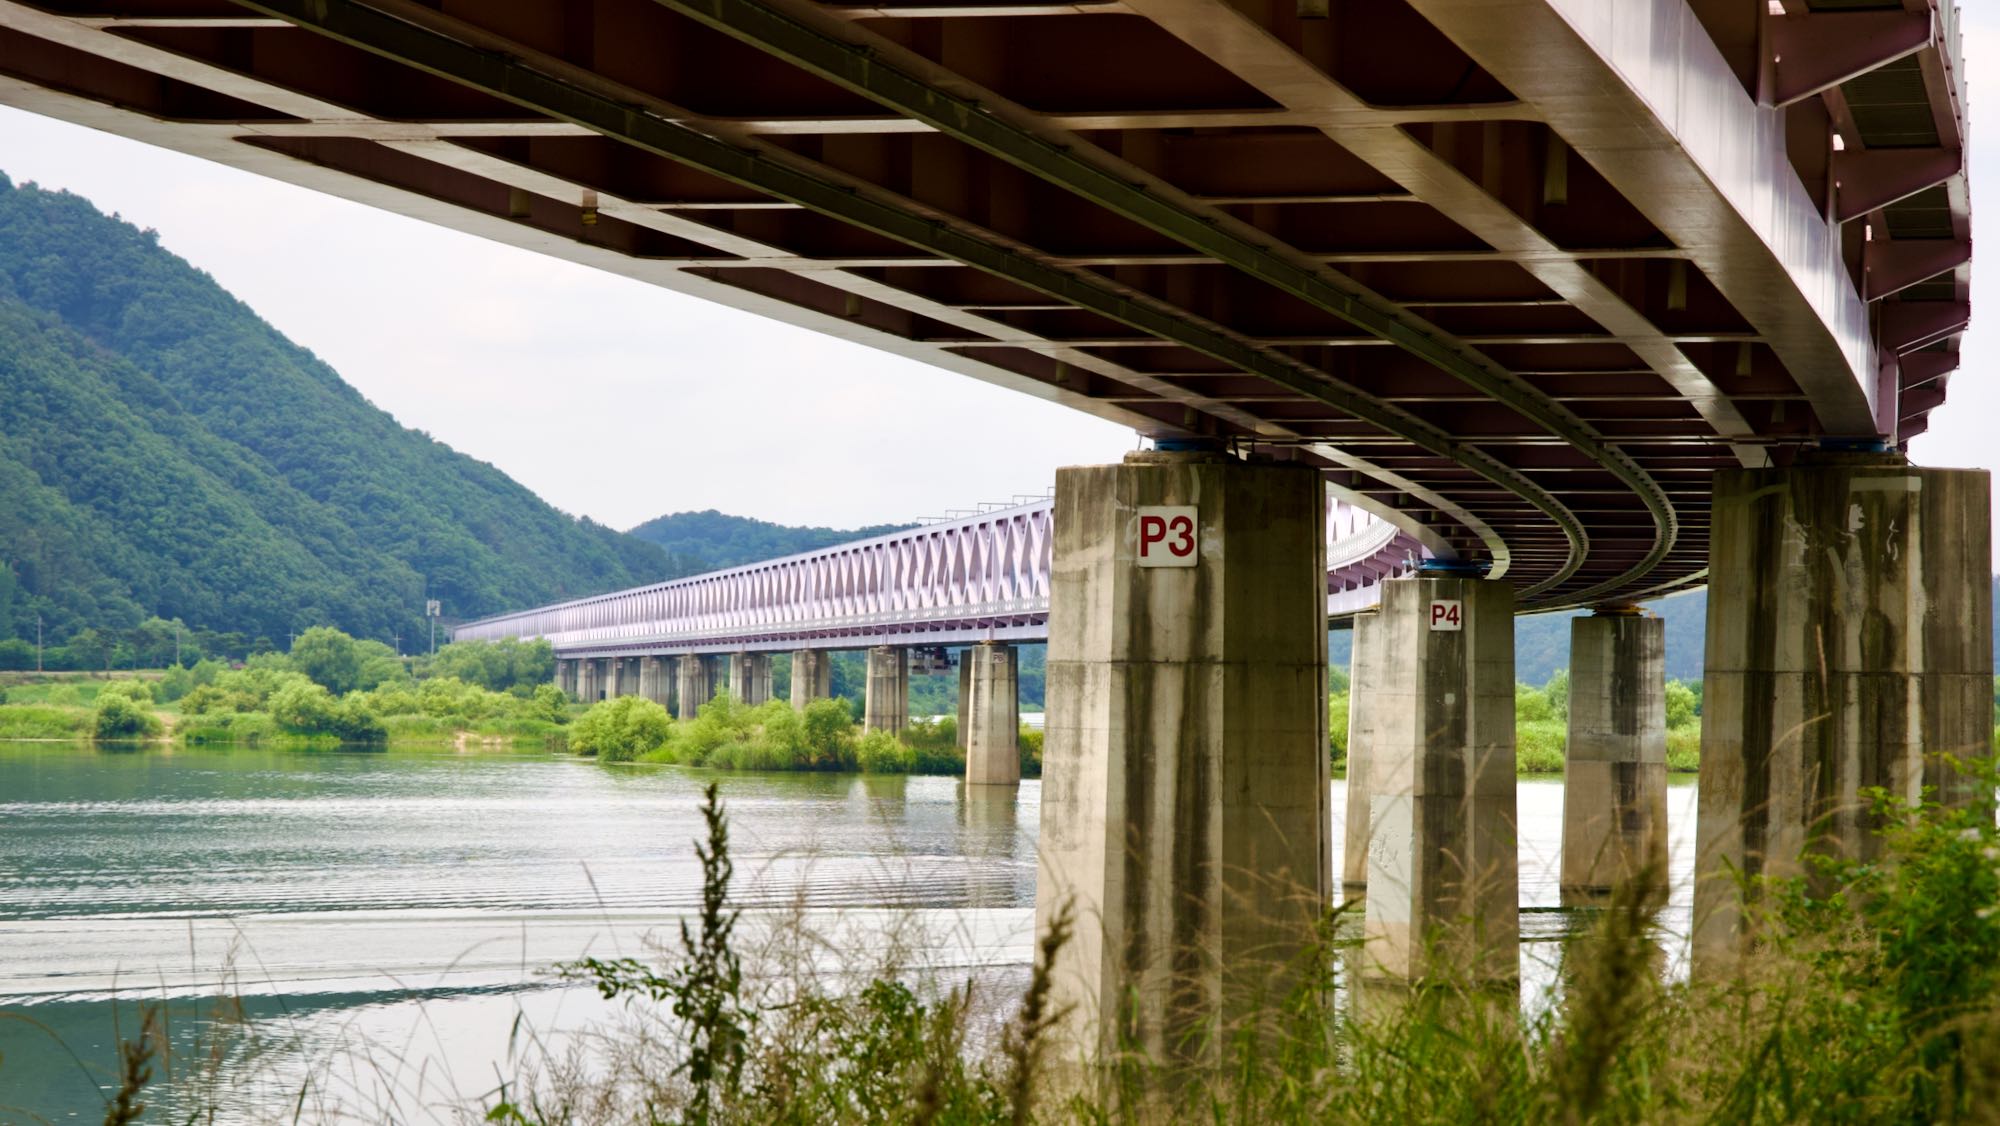 A picture of the Nakdong River Railroad Bridge (낙동강철교) on the Nakdonggang Bike Path (낙동강자전거길) along the Nakdong River (낙동강) in Gimhae City, in South Korea.